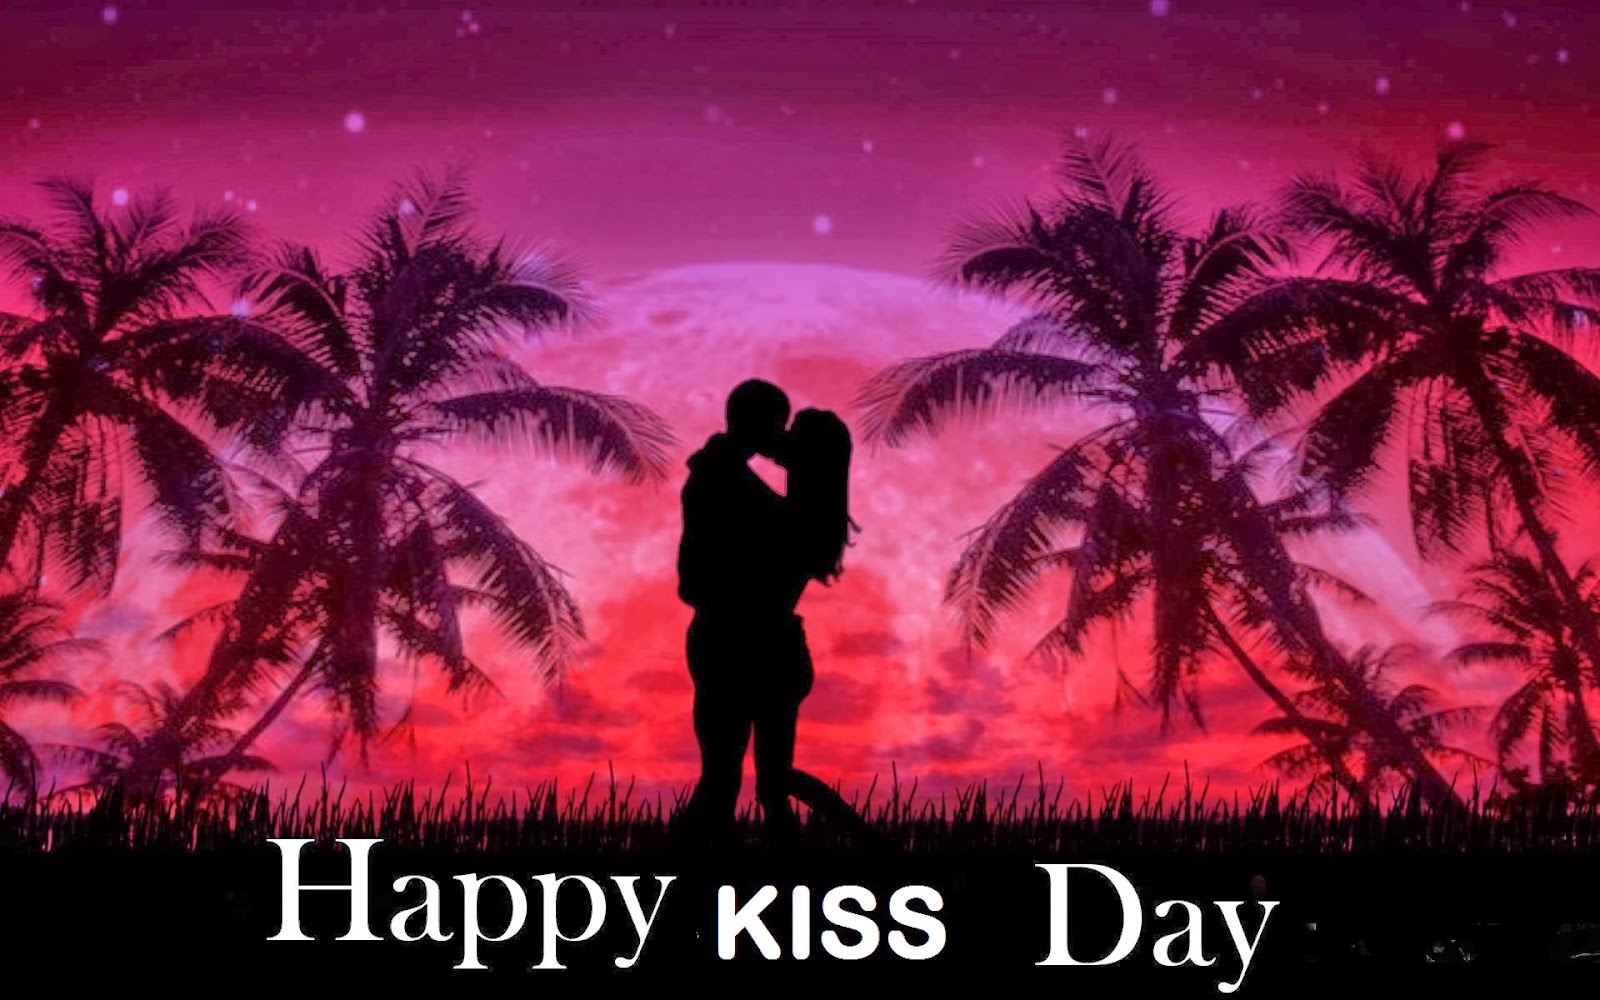 Happy Kiss Day (13th February 2014) Lovely HD Wallpapers and Images